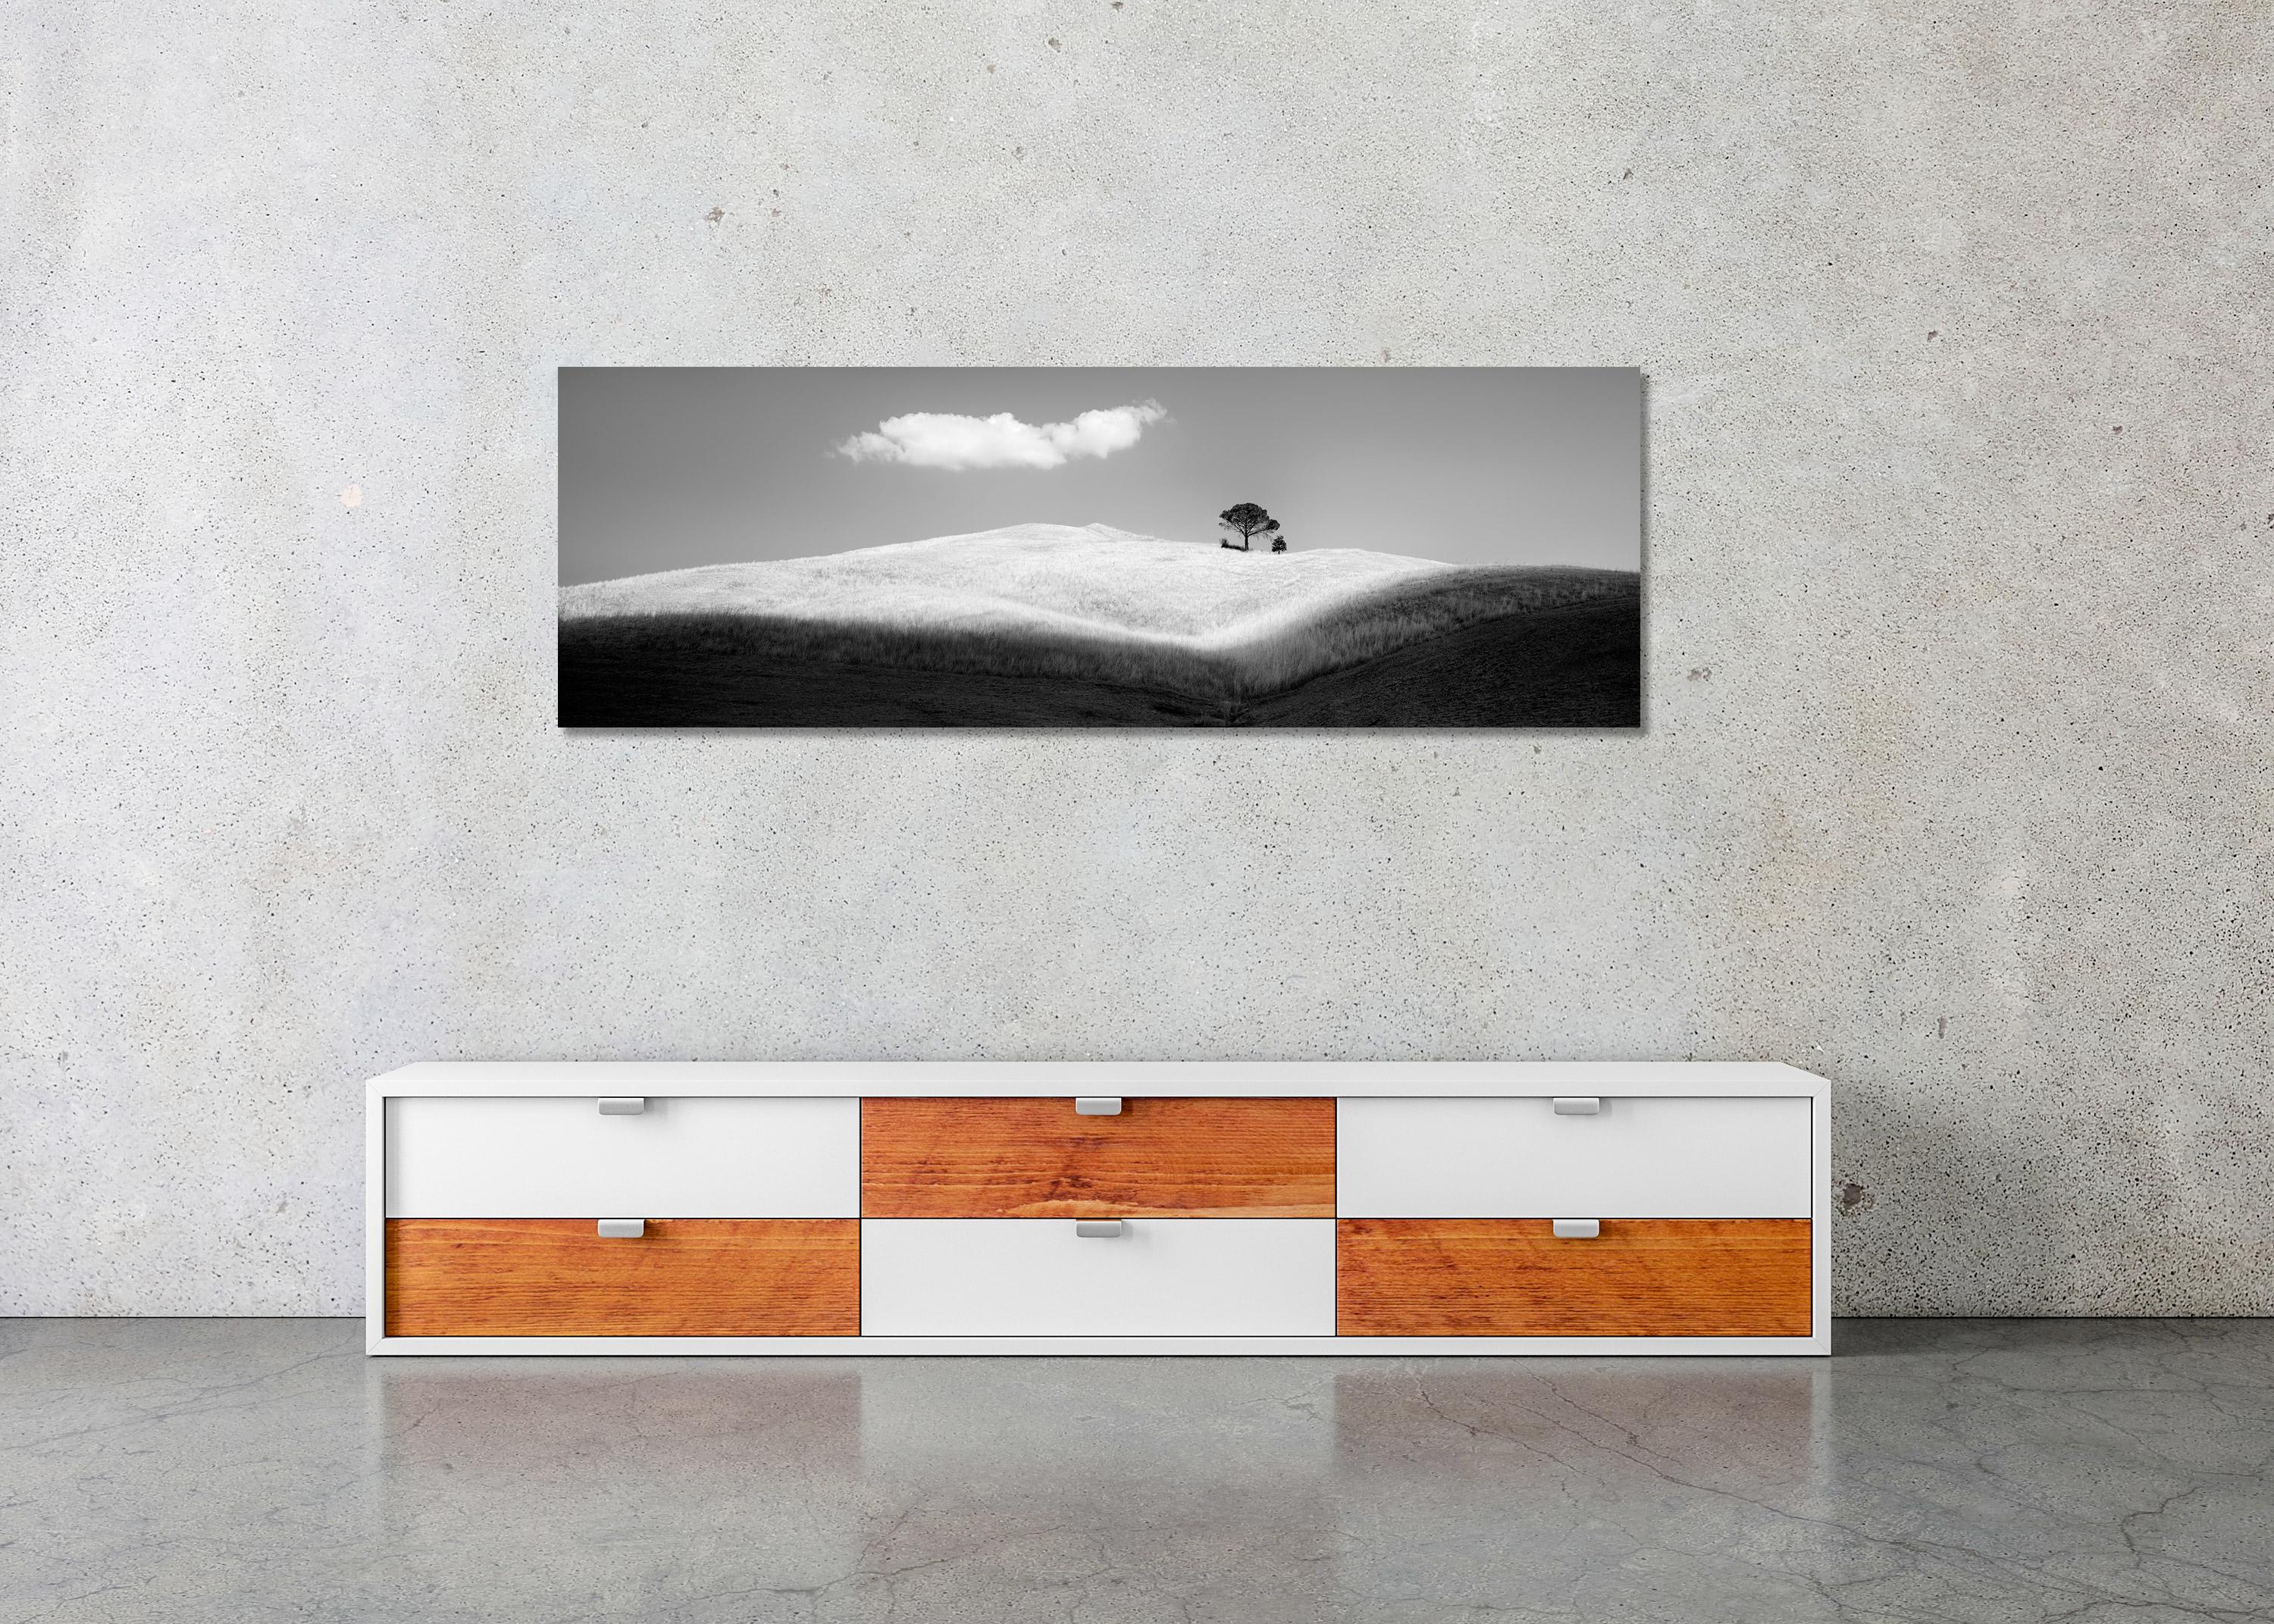 Black and white fine art long landscape photography. Archival pigment ink print as part of a limited edition of 7. All Gerald Berghammer prints are made to order in limited editions on Hahnemuehle Photo Rag Baryta. Each print is stamped on the back